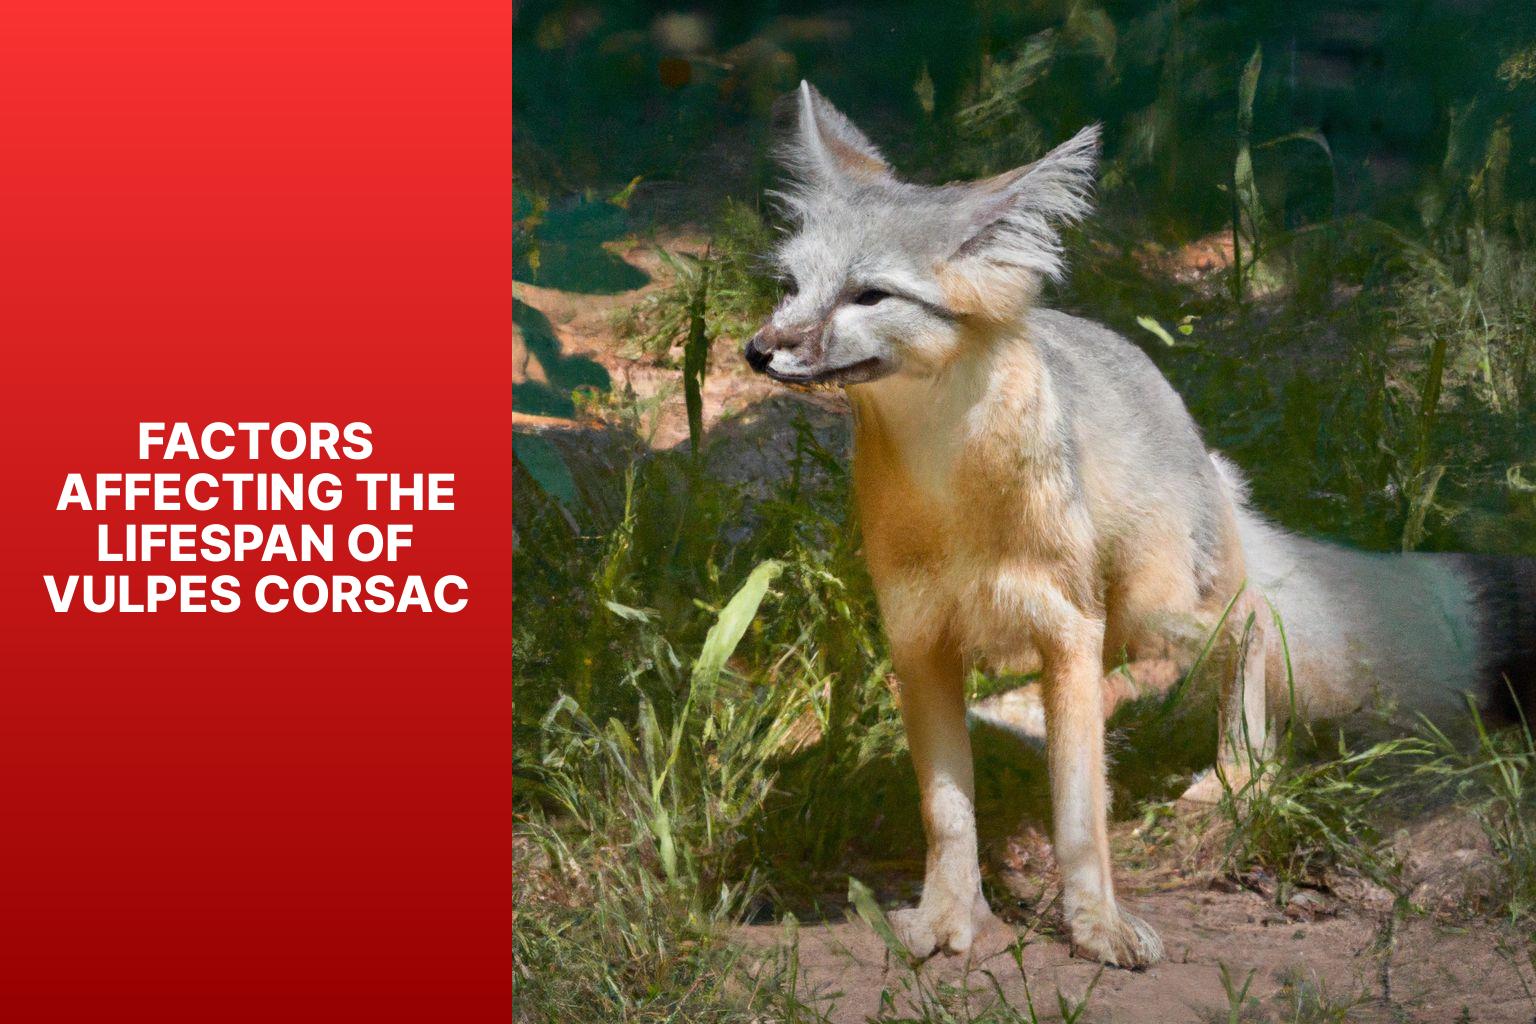 Factors Affecting the Lifespan of Vulpes Corsac - Vulpes Corsac Lifespan 